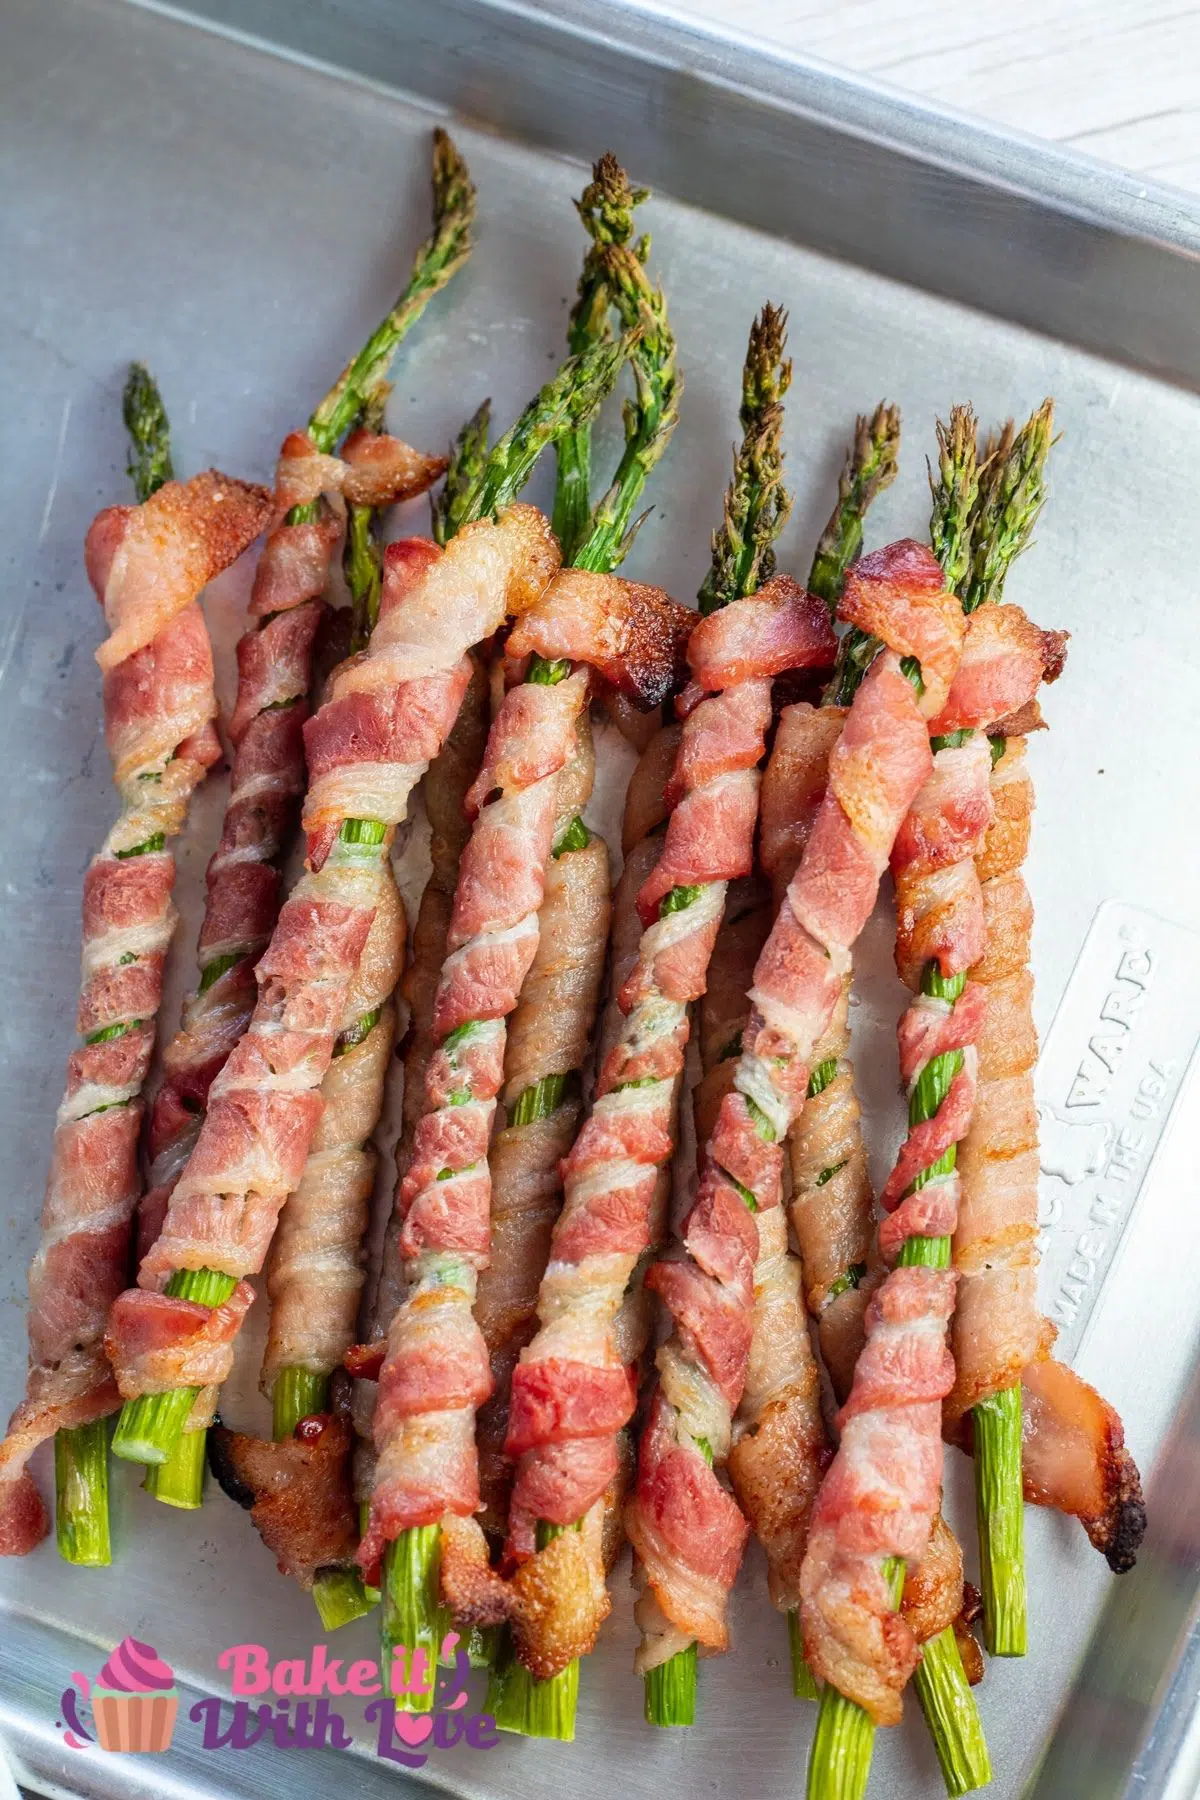 Tall overhead image of the baked bacon wrapped asparagus spears.